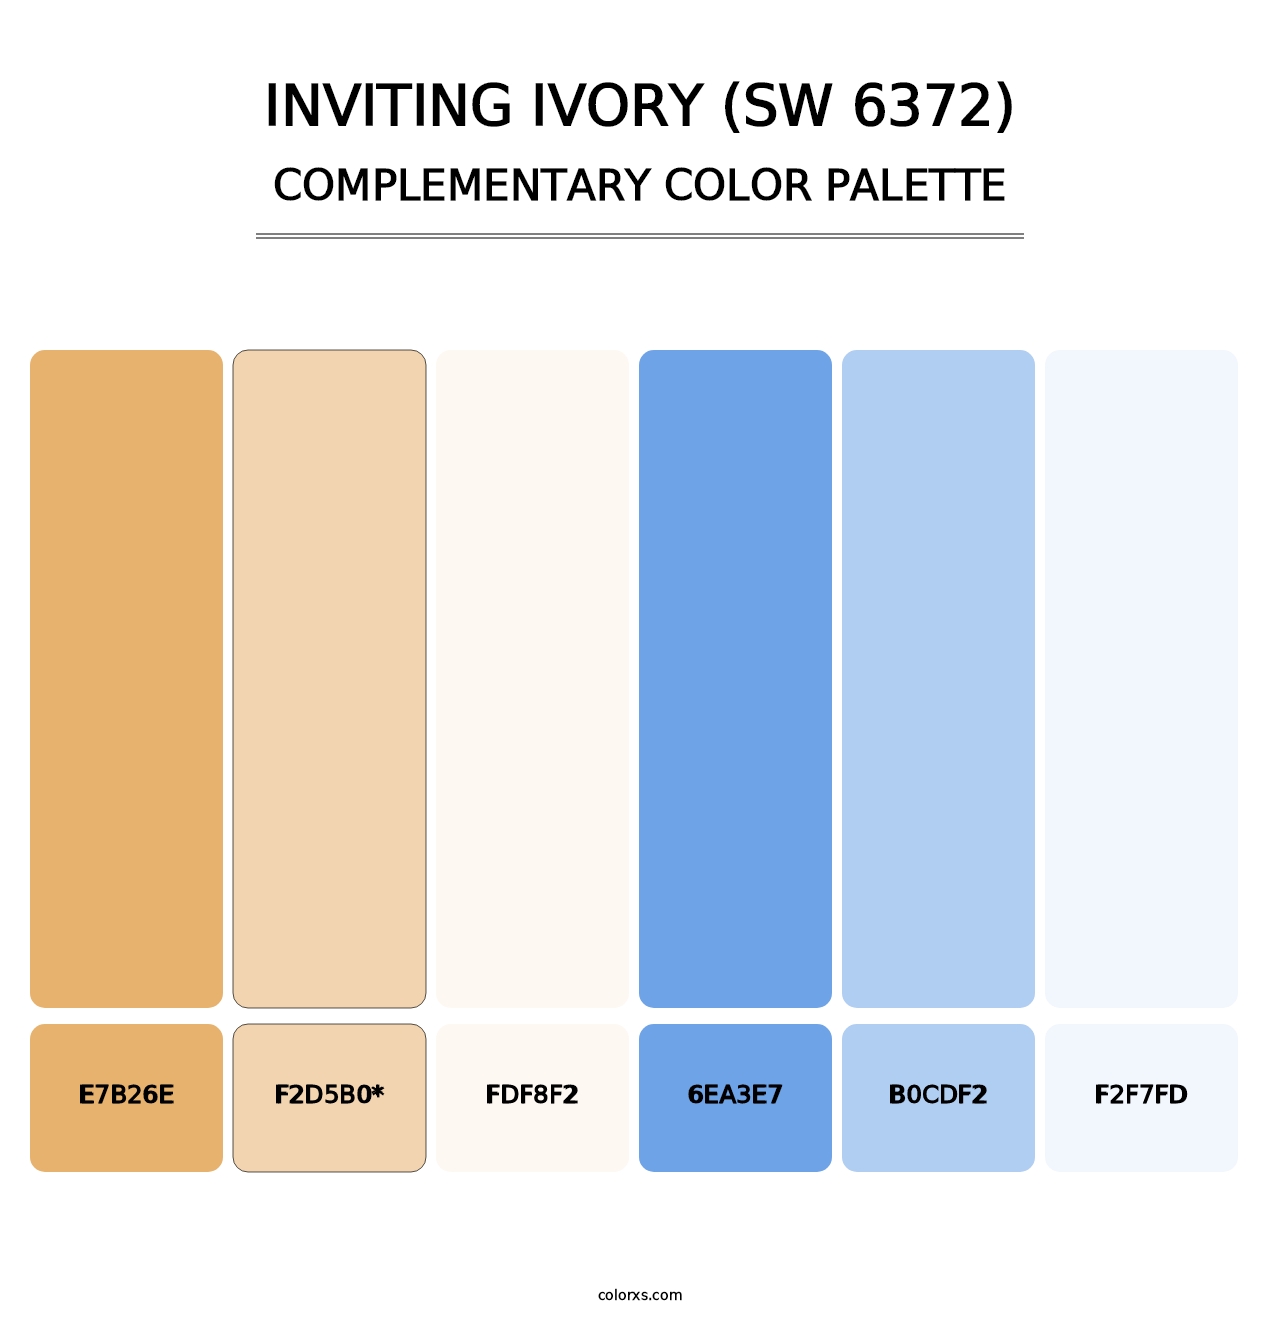 Inviting Ivory (SW 6372) - Complementary Color Palette